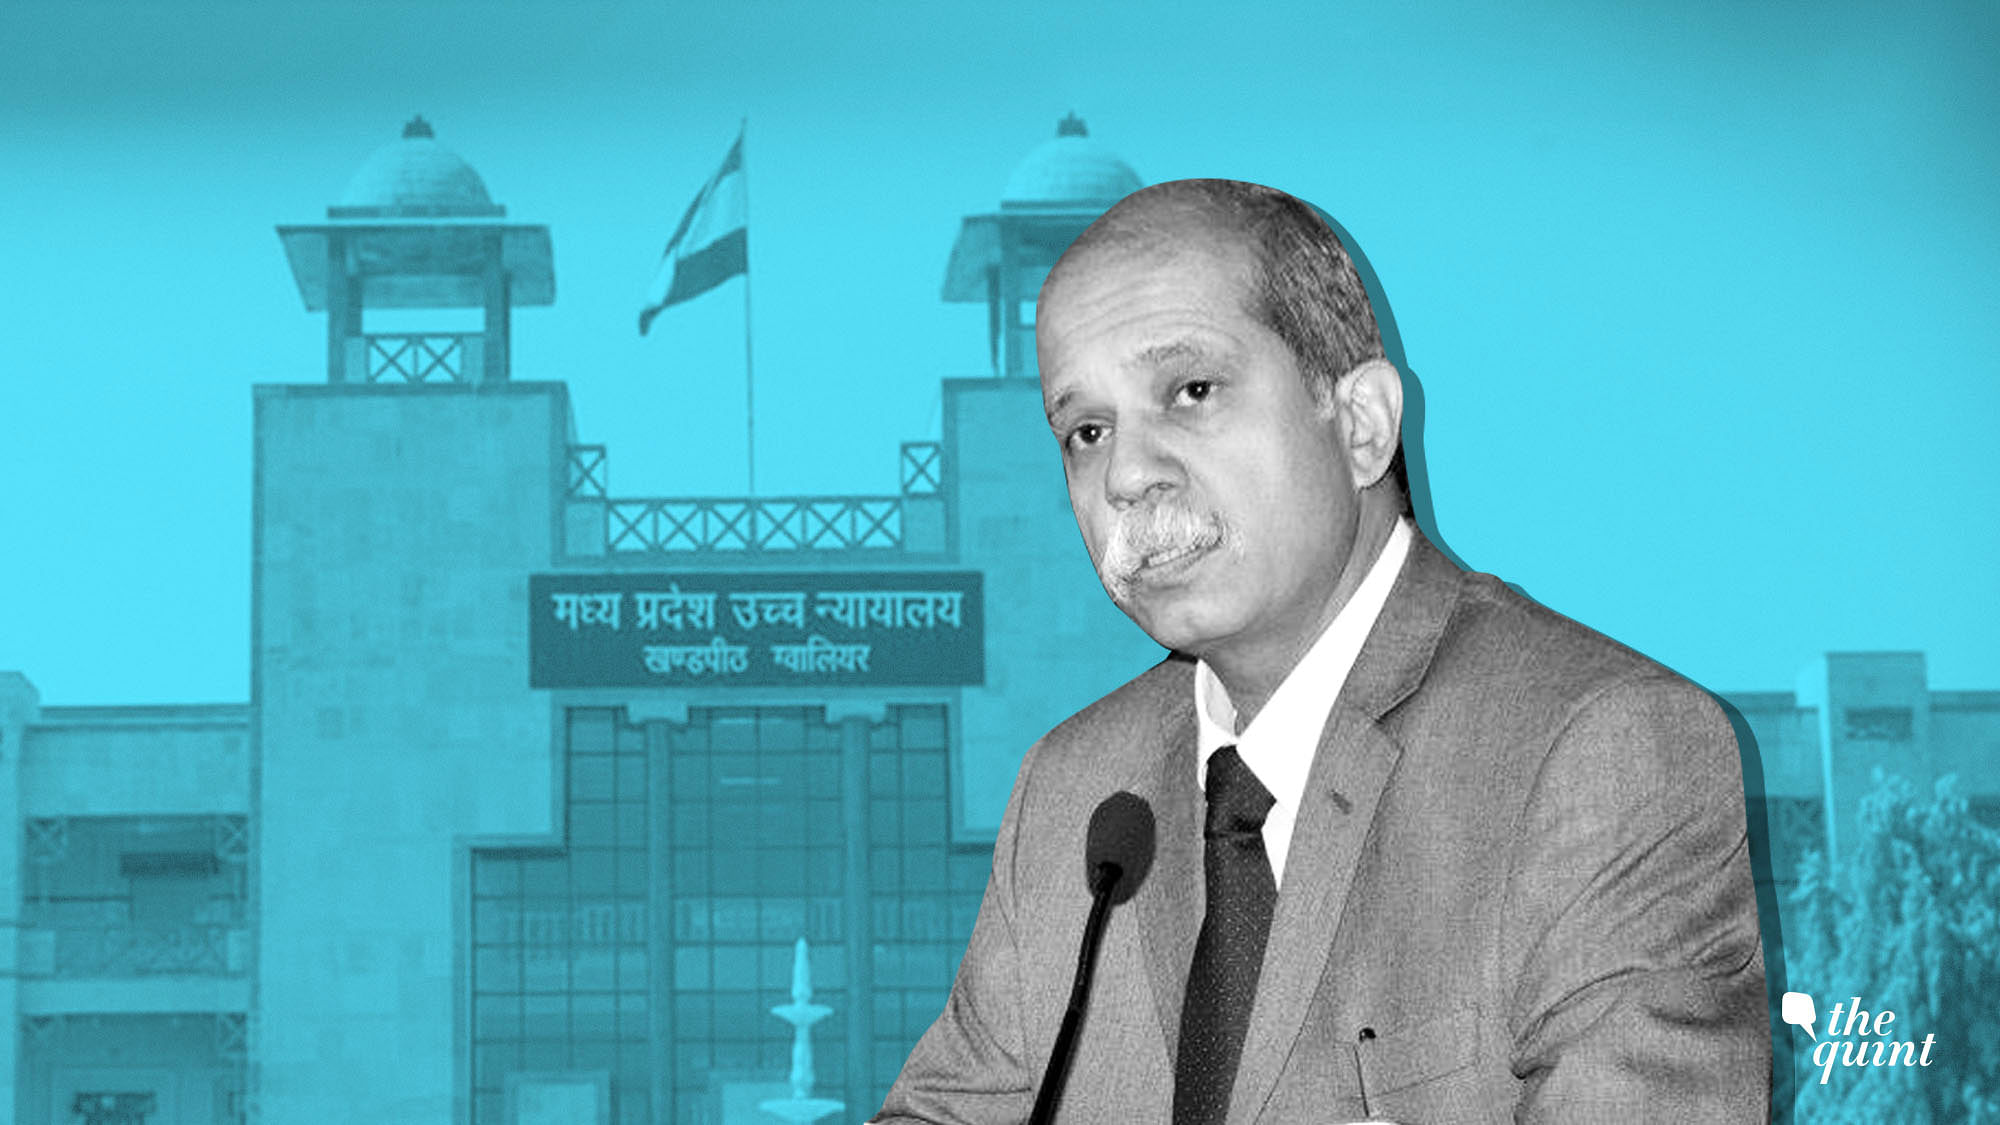 Justice Akil Kureshi is currently appointed as a judge in Bombay High Court